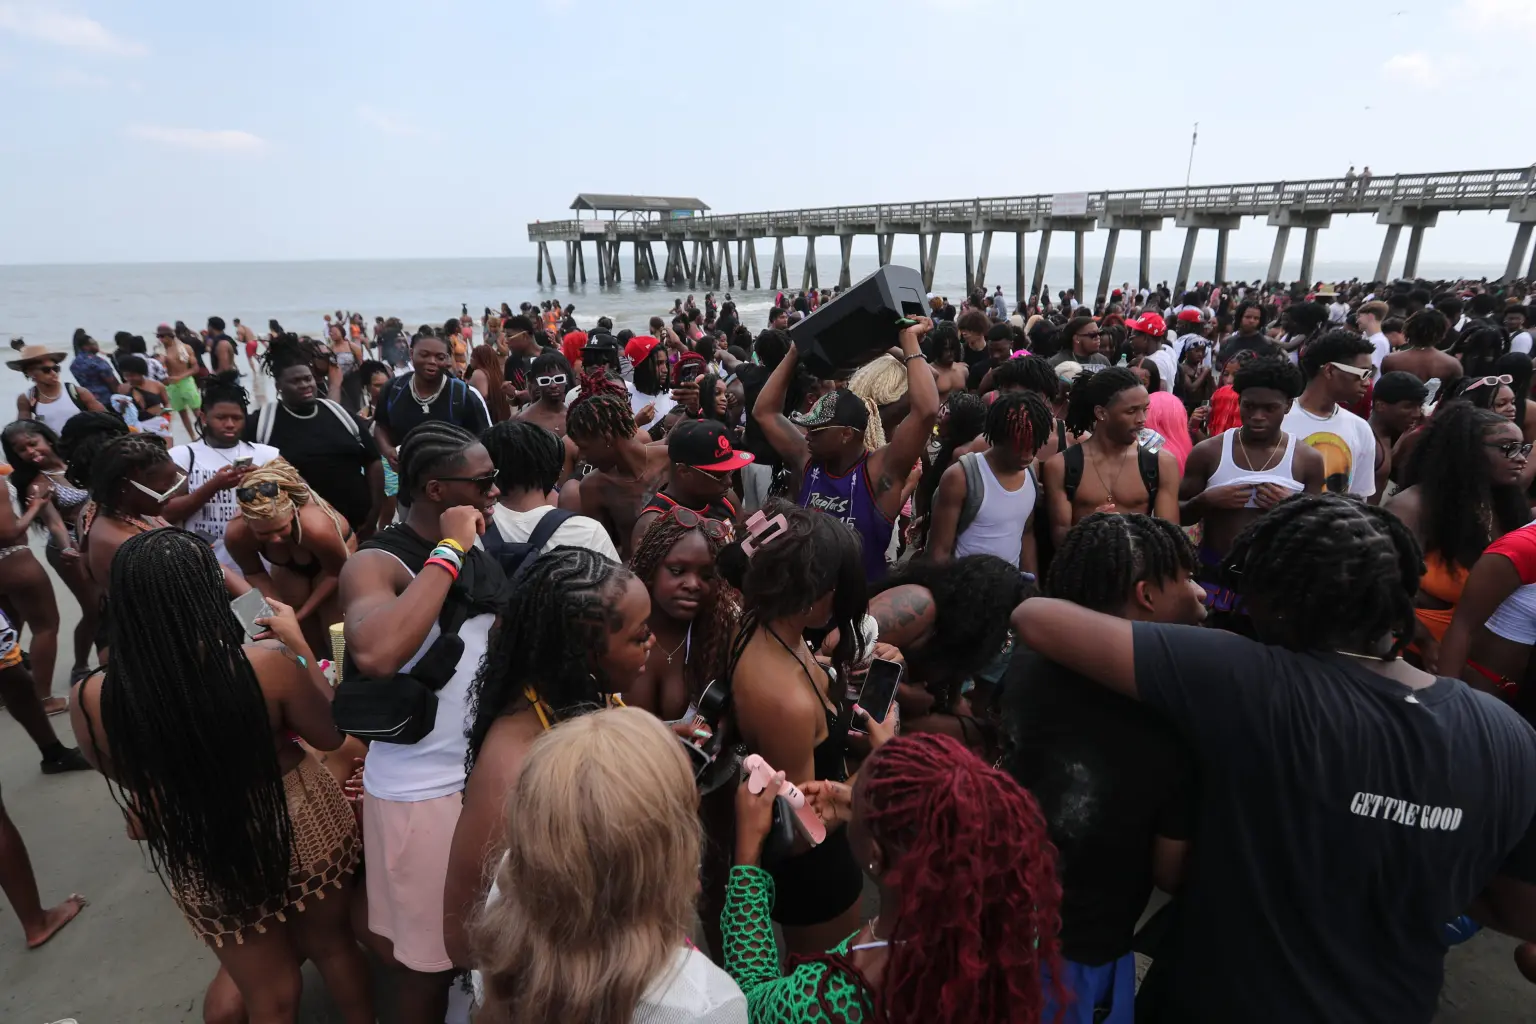 54 Spring Breakers Arrested In Savannah Bash Amid Booze-Soaked Brawls